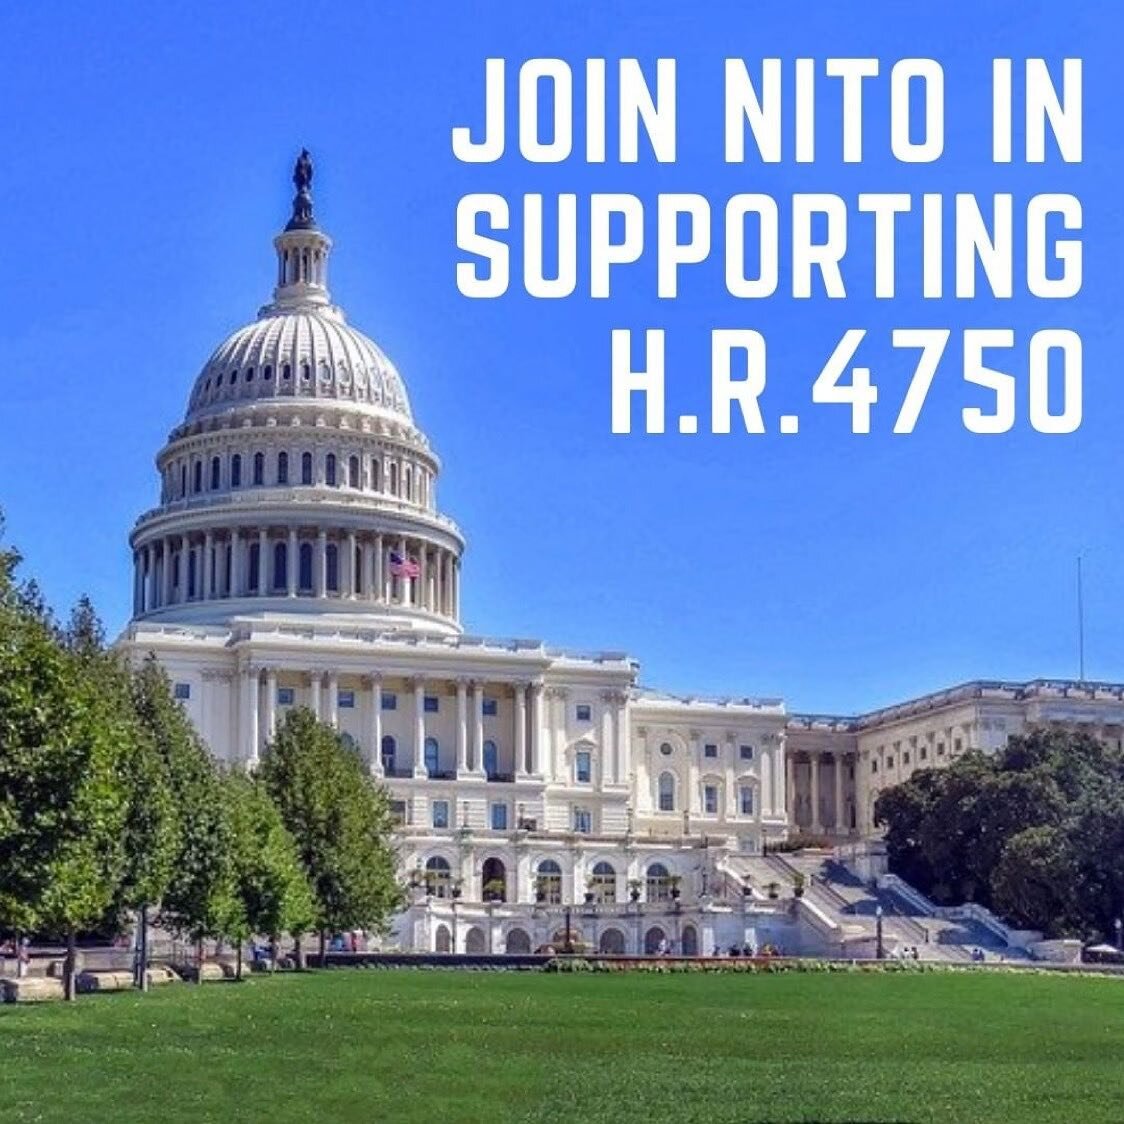 Repost from @nito_live
&bull;
HELP ARTISTS NOW! Join NITO in support of H.R. 4750: The Performing Artist Parity Act, which expands tax deductions for the expenses of performing artists including commissions to managers and agents. 

Click the link in